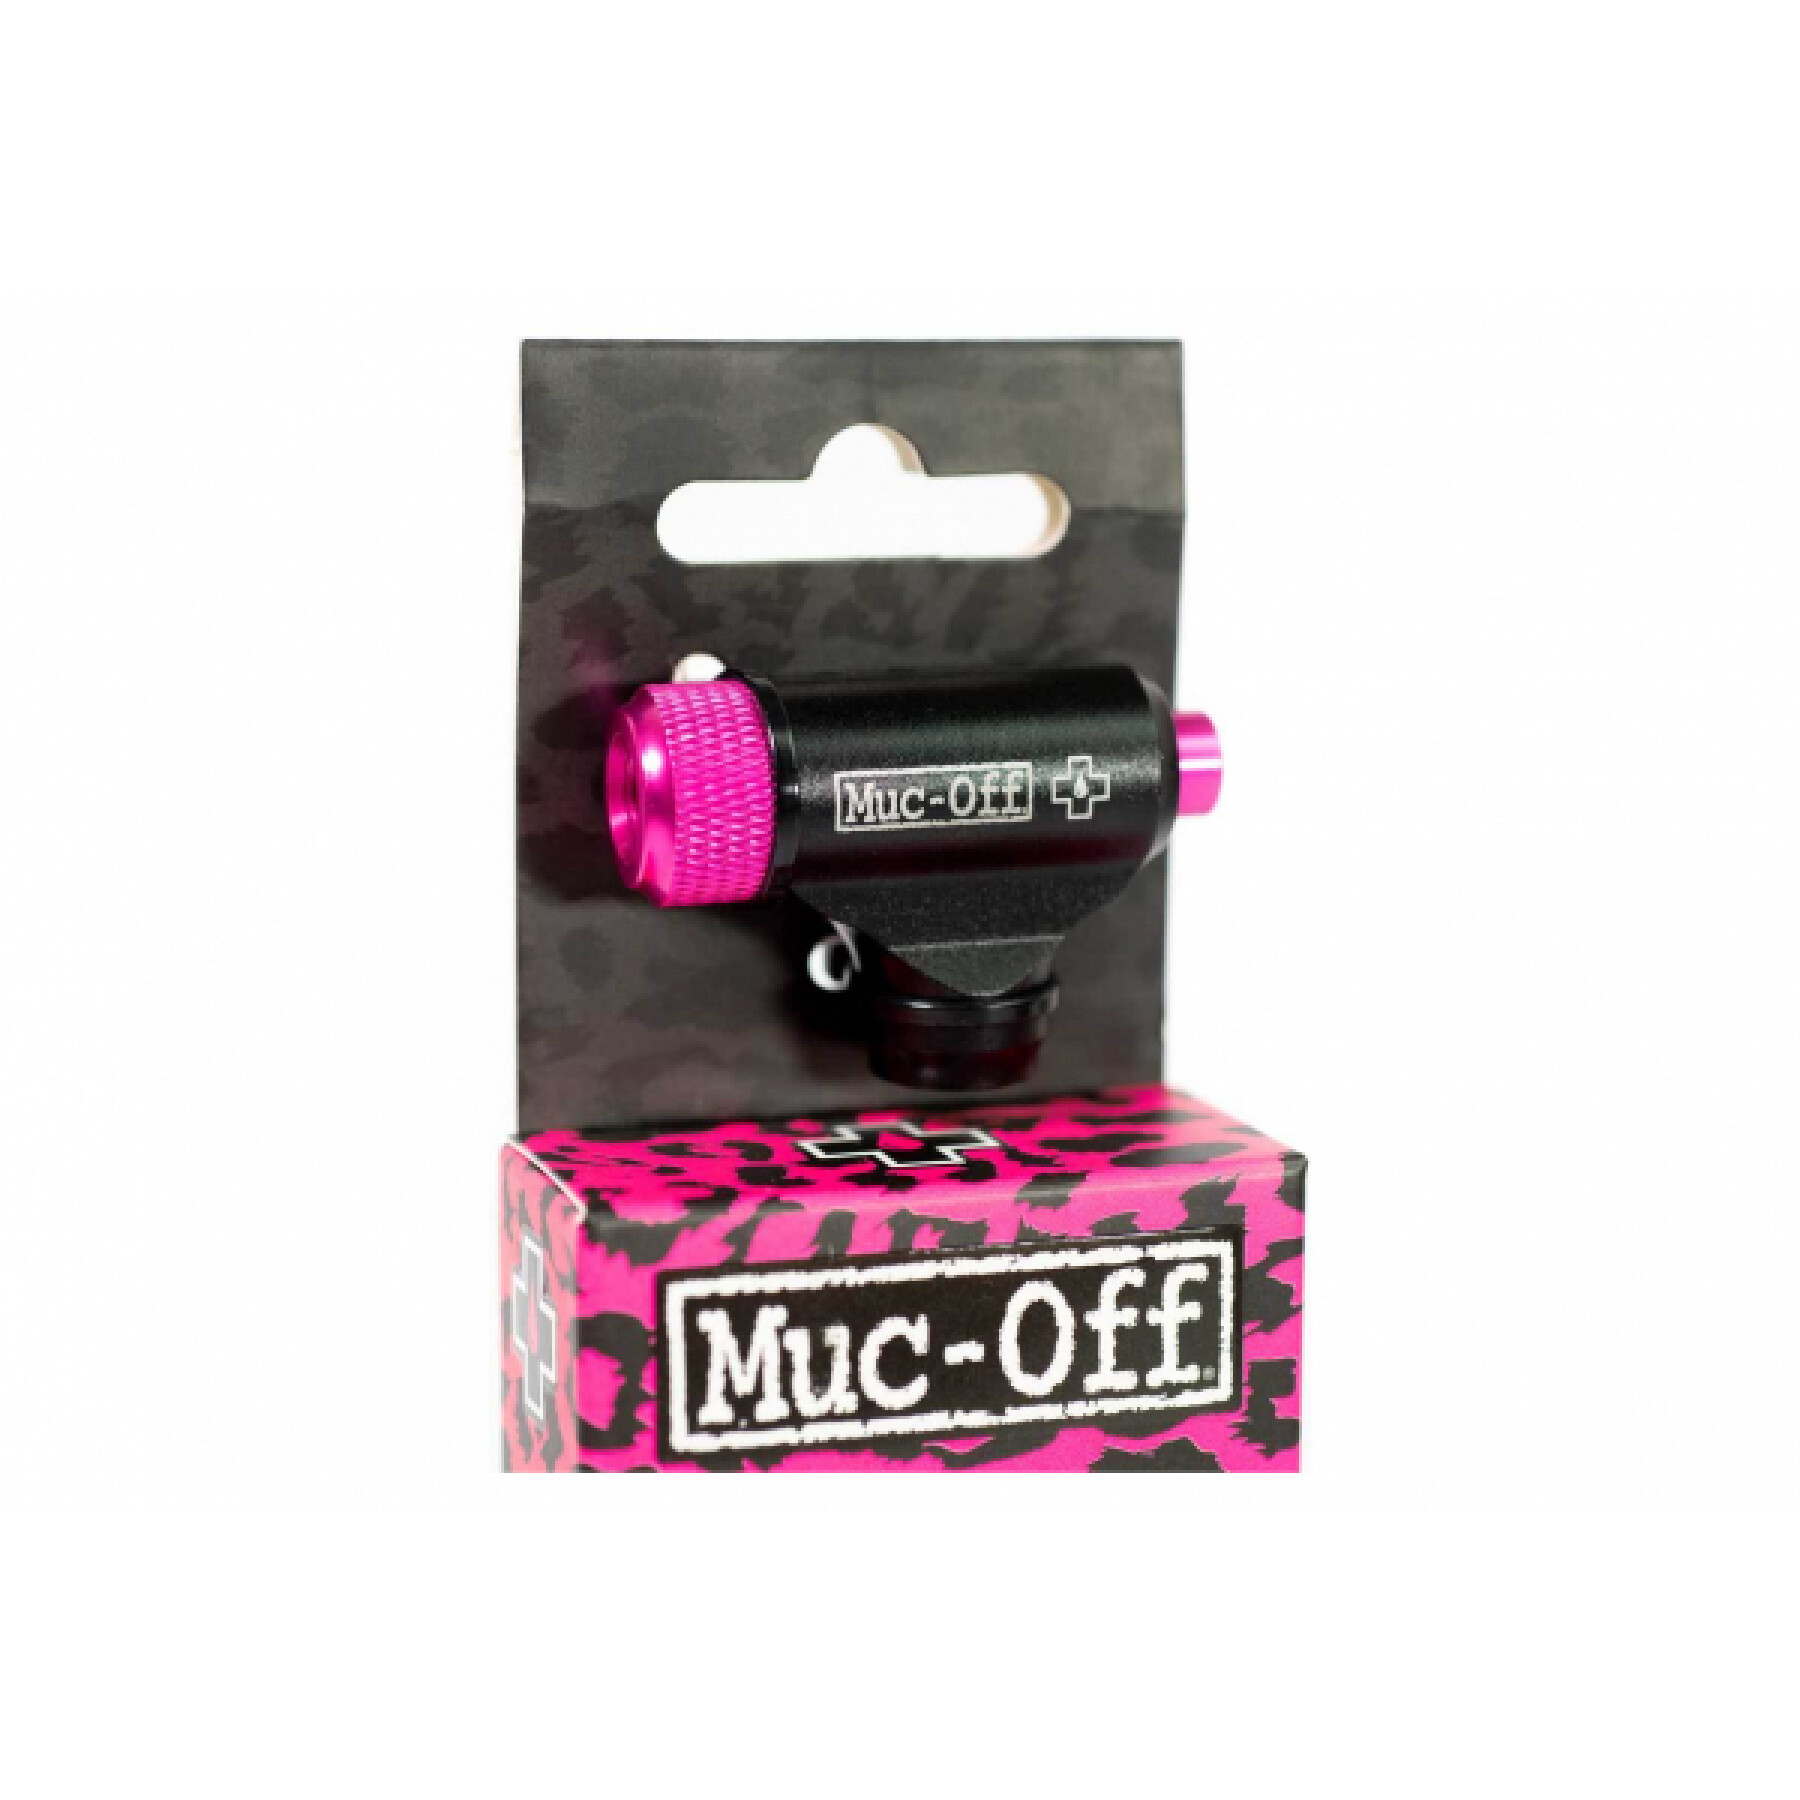 Co2 inflation kit Muc-Off Road